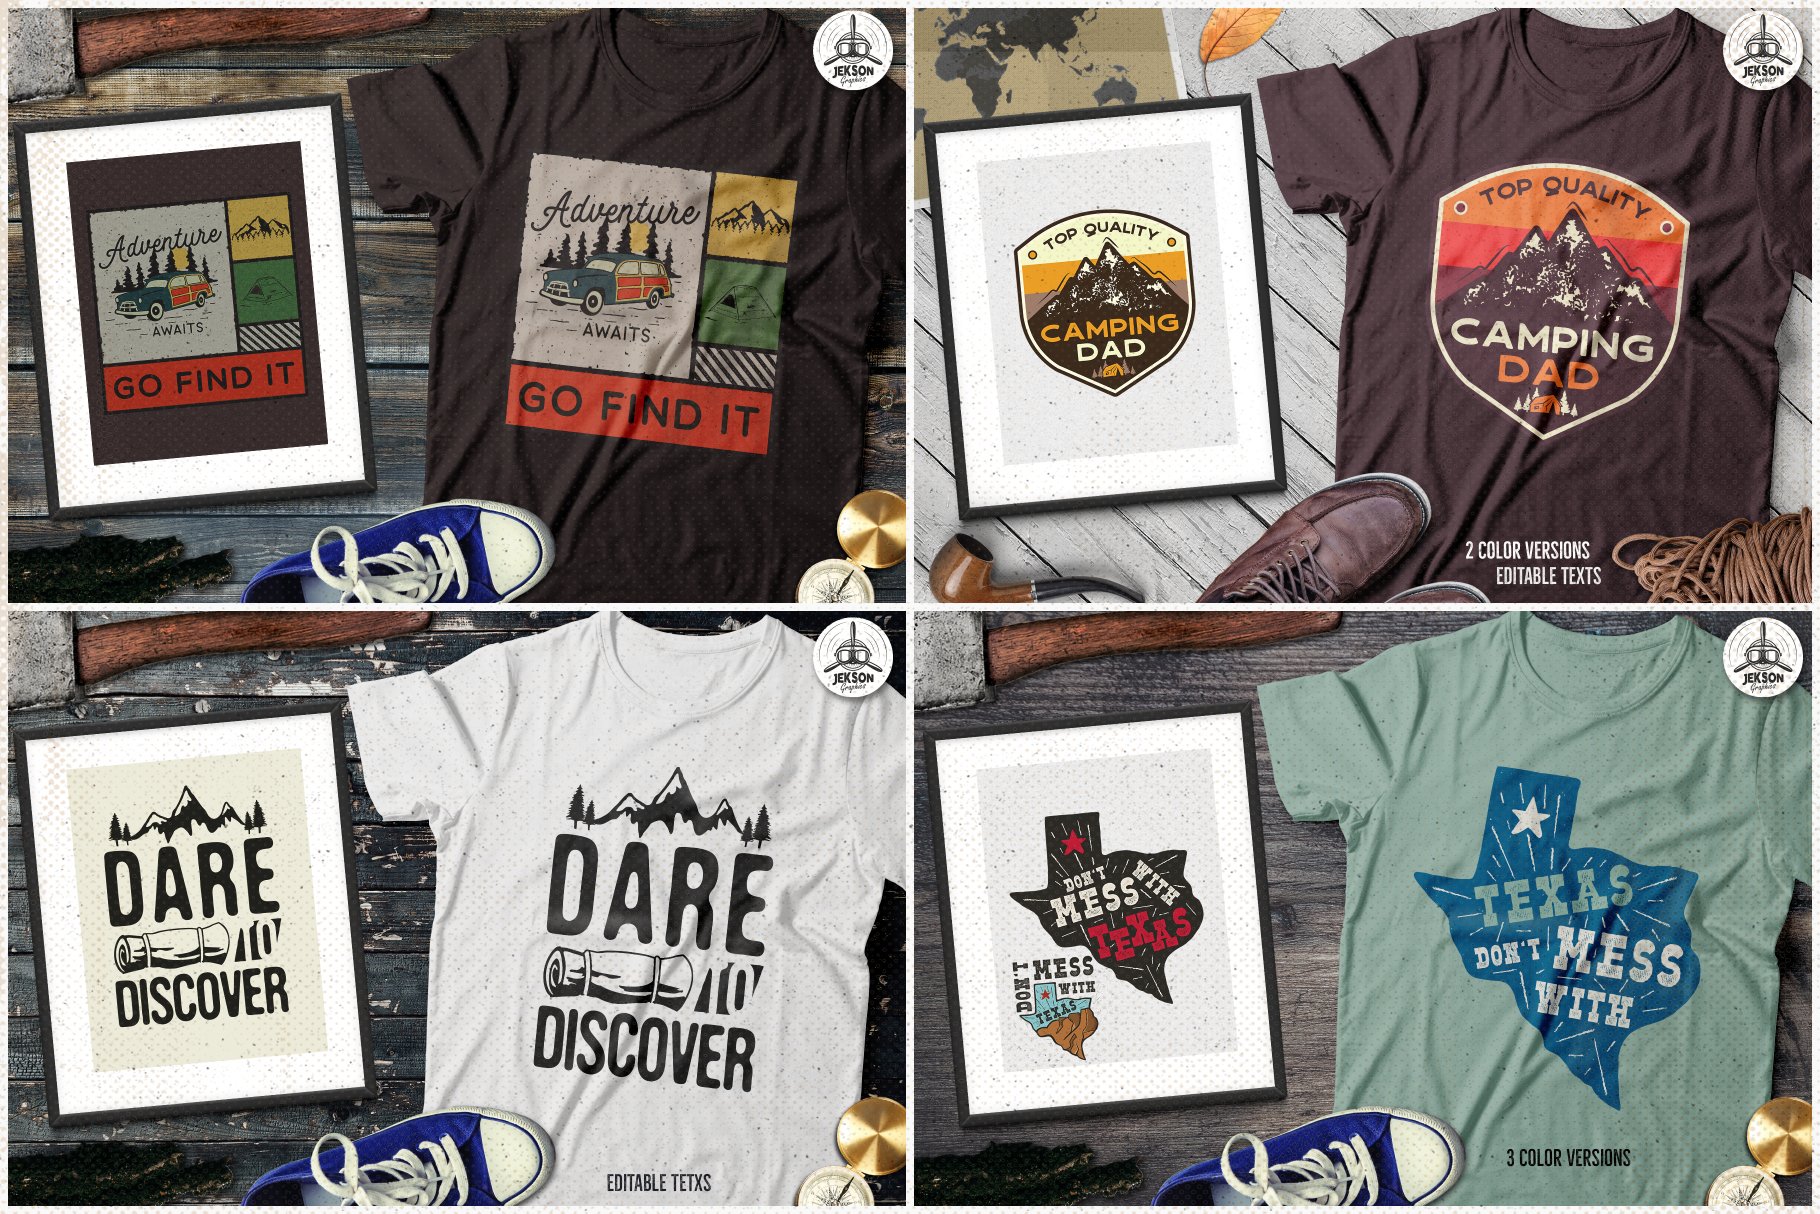 Cool t-shirts for adventures.